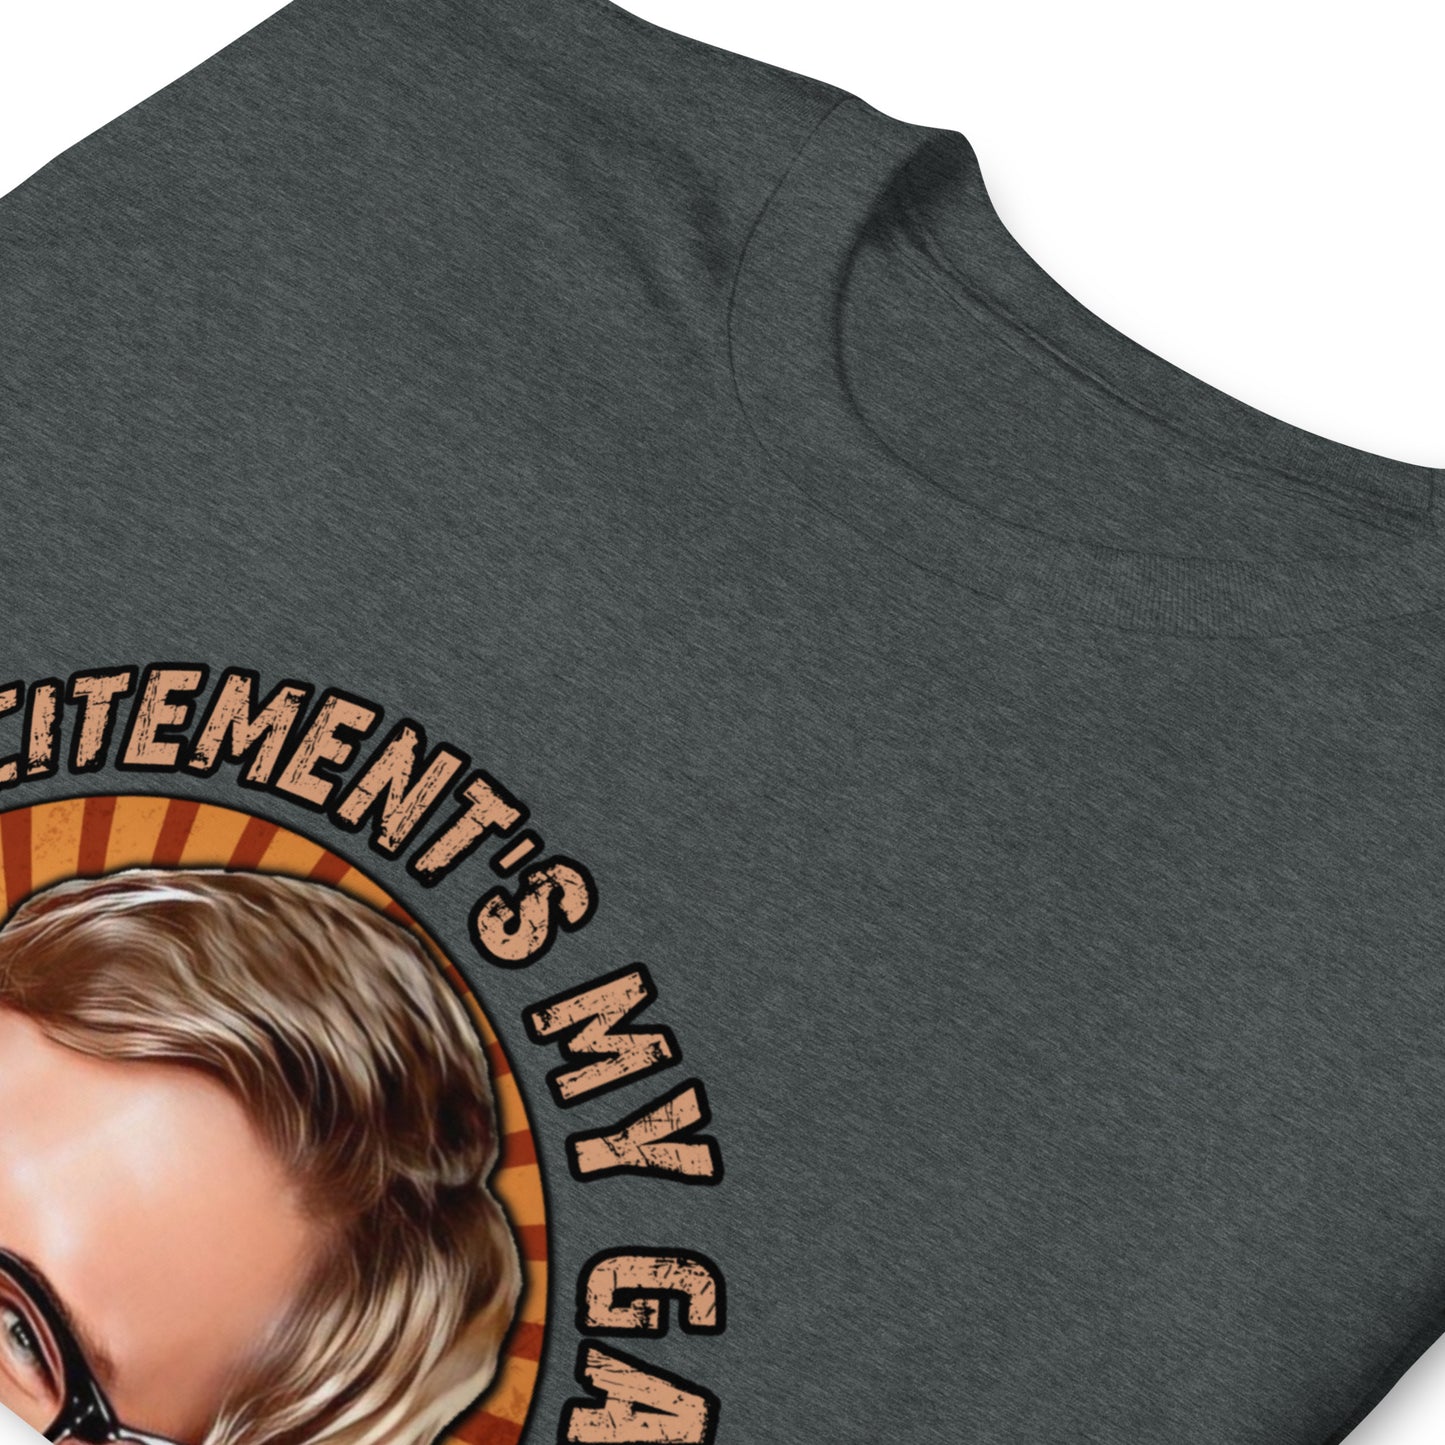 Big Trouble in Little China Unisex T-Shirt, Excitements my game.